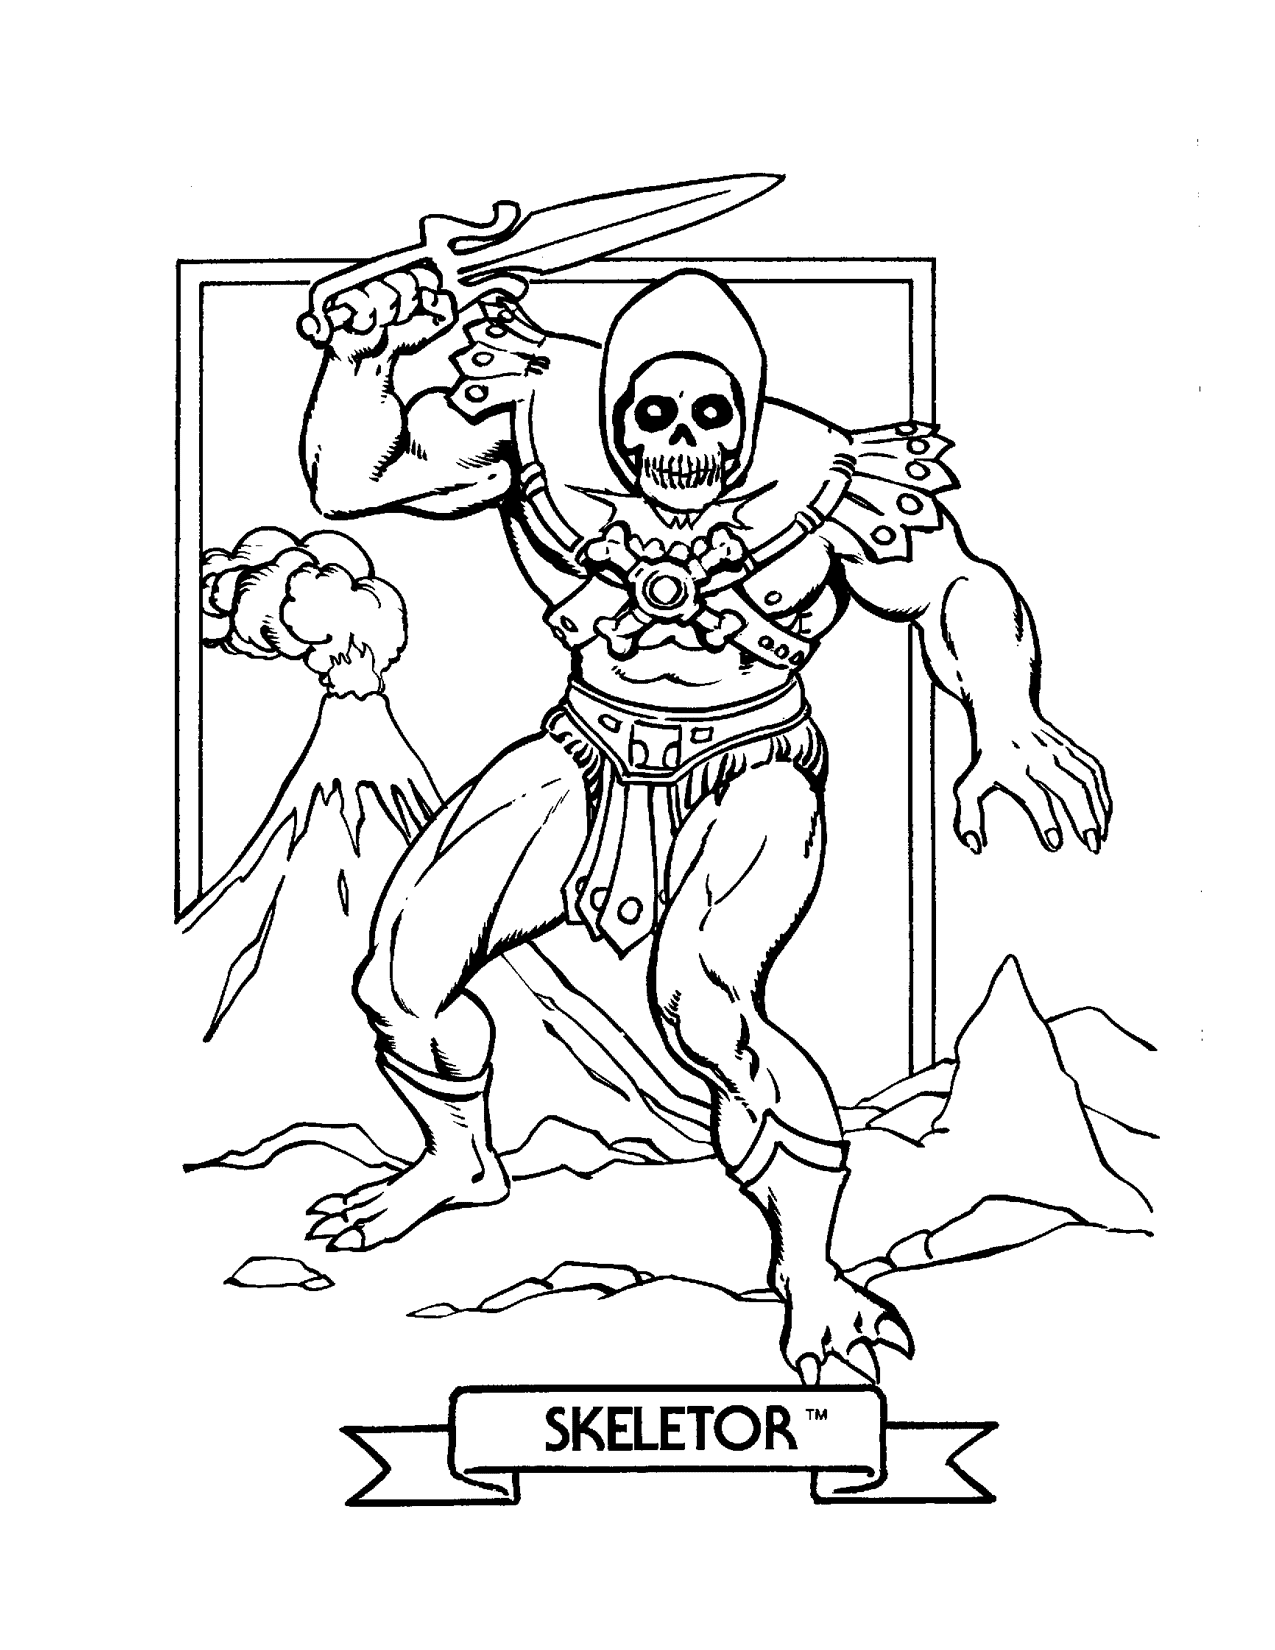 Skeletor Coloring Page